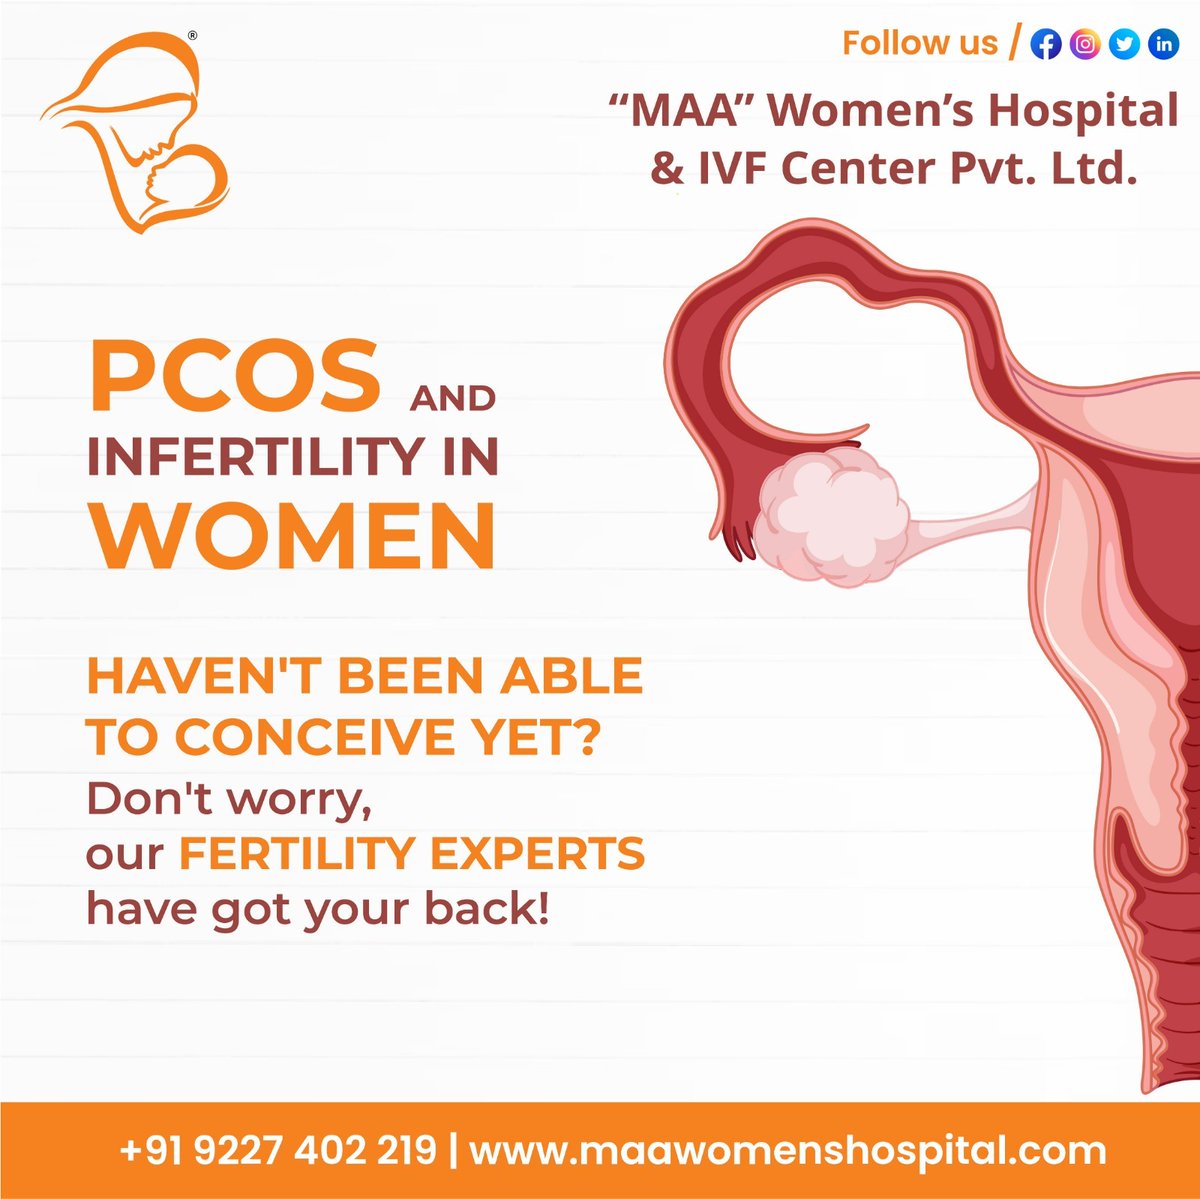 PCOS AND INFERTILITY IN WOMEN HAVEN'T BEEN ABLE TO CONCEIVE YET?

Don't worry, our FERTILITY EXPERTS have got your back!

#MaaWomensHospital #maternityhospital #gynecologist #pcos #infertility #weightloss #fertility #ivf #womenshealth #health #pregnancy #healthylifestyle